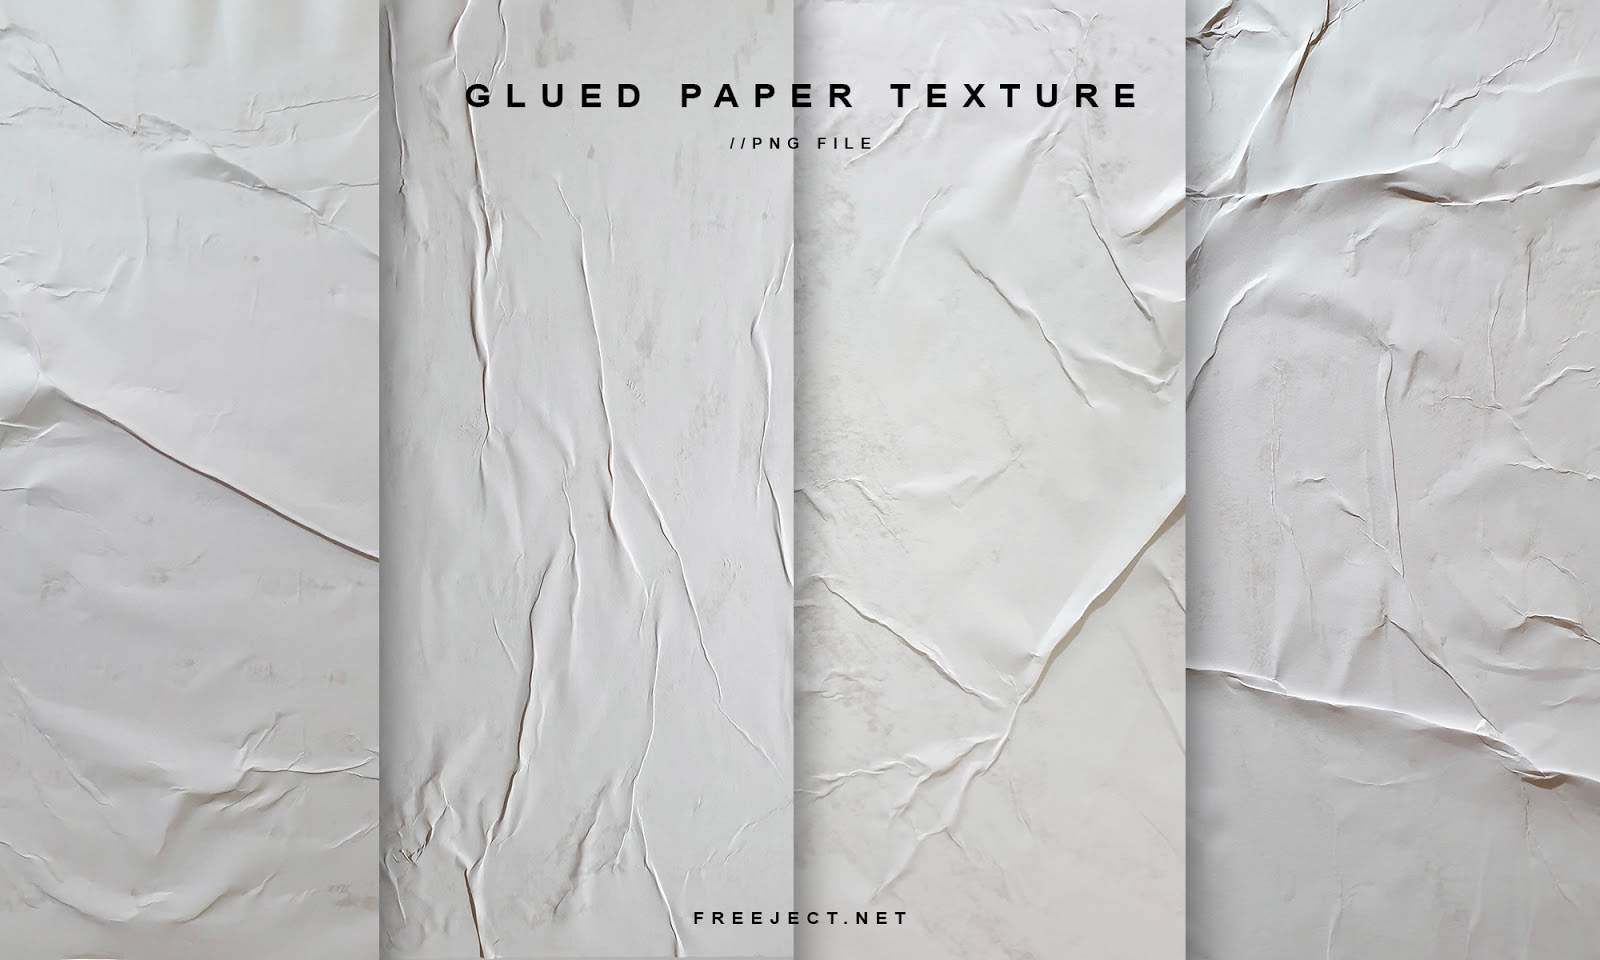 Free Download Glued Paper Texture Png File